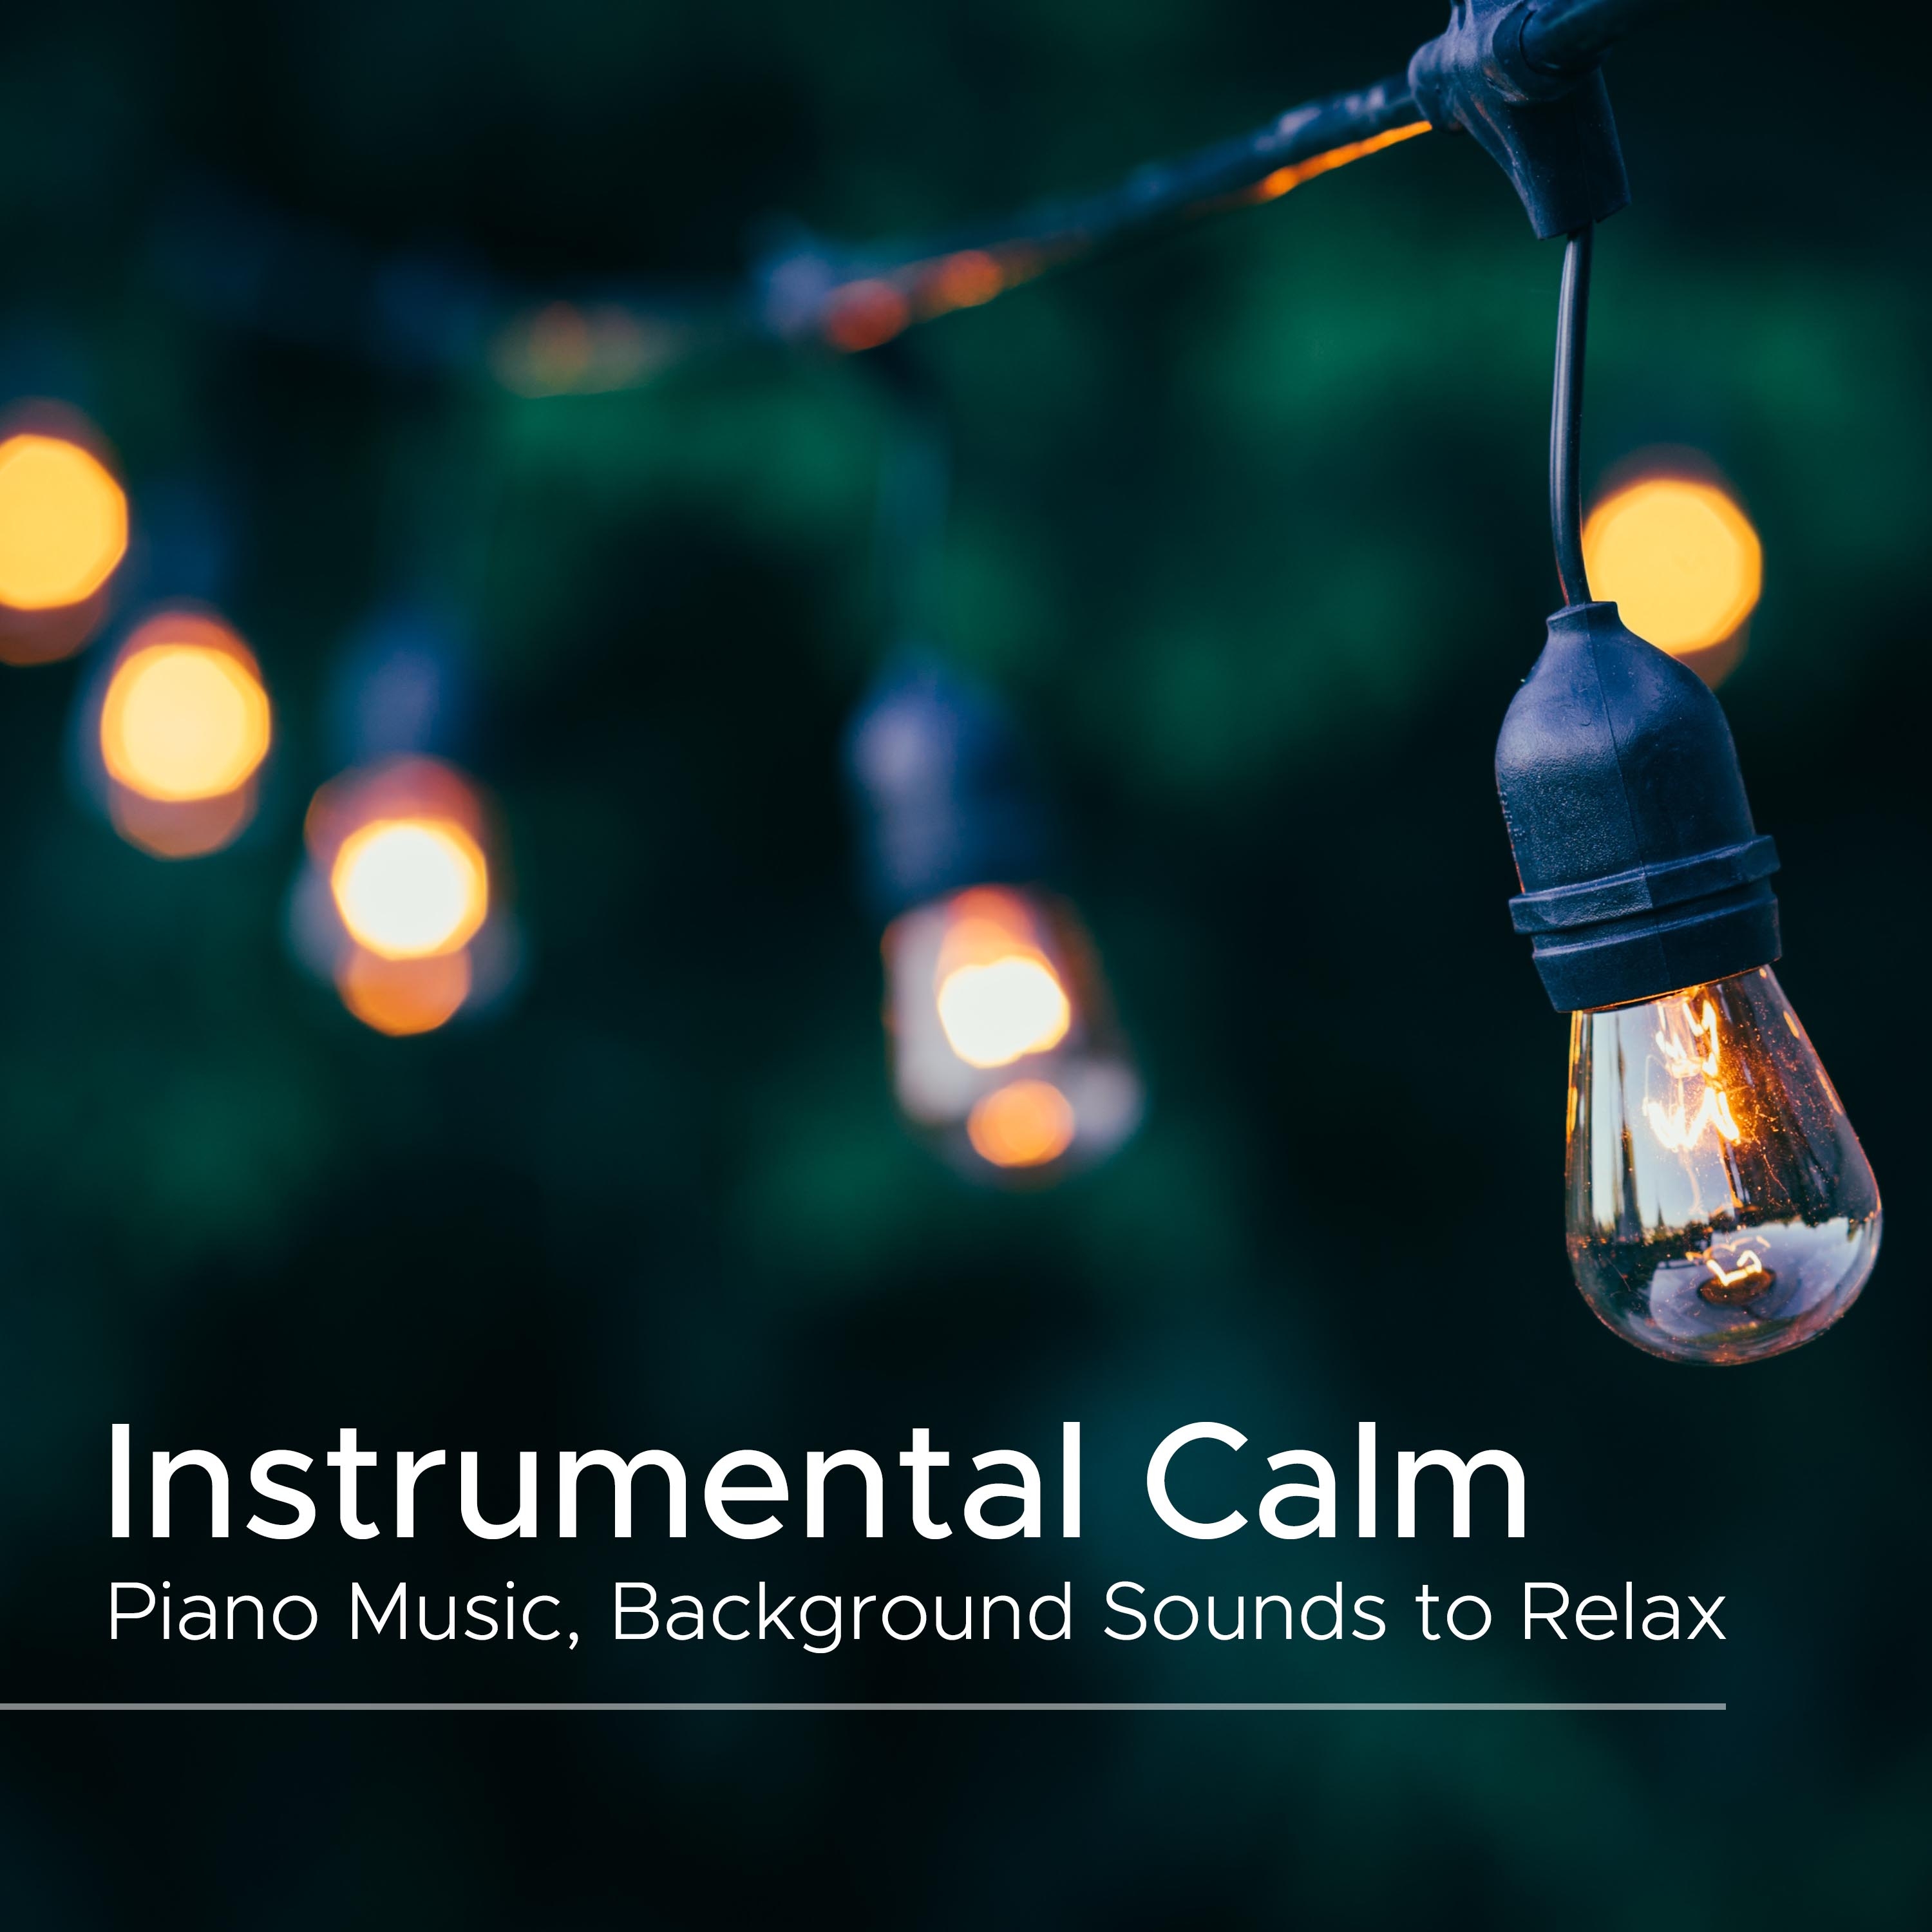 Instrumental Calm - Piano Music, Background Sounds to Relax